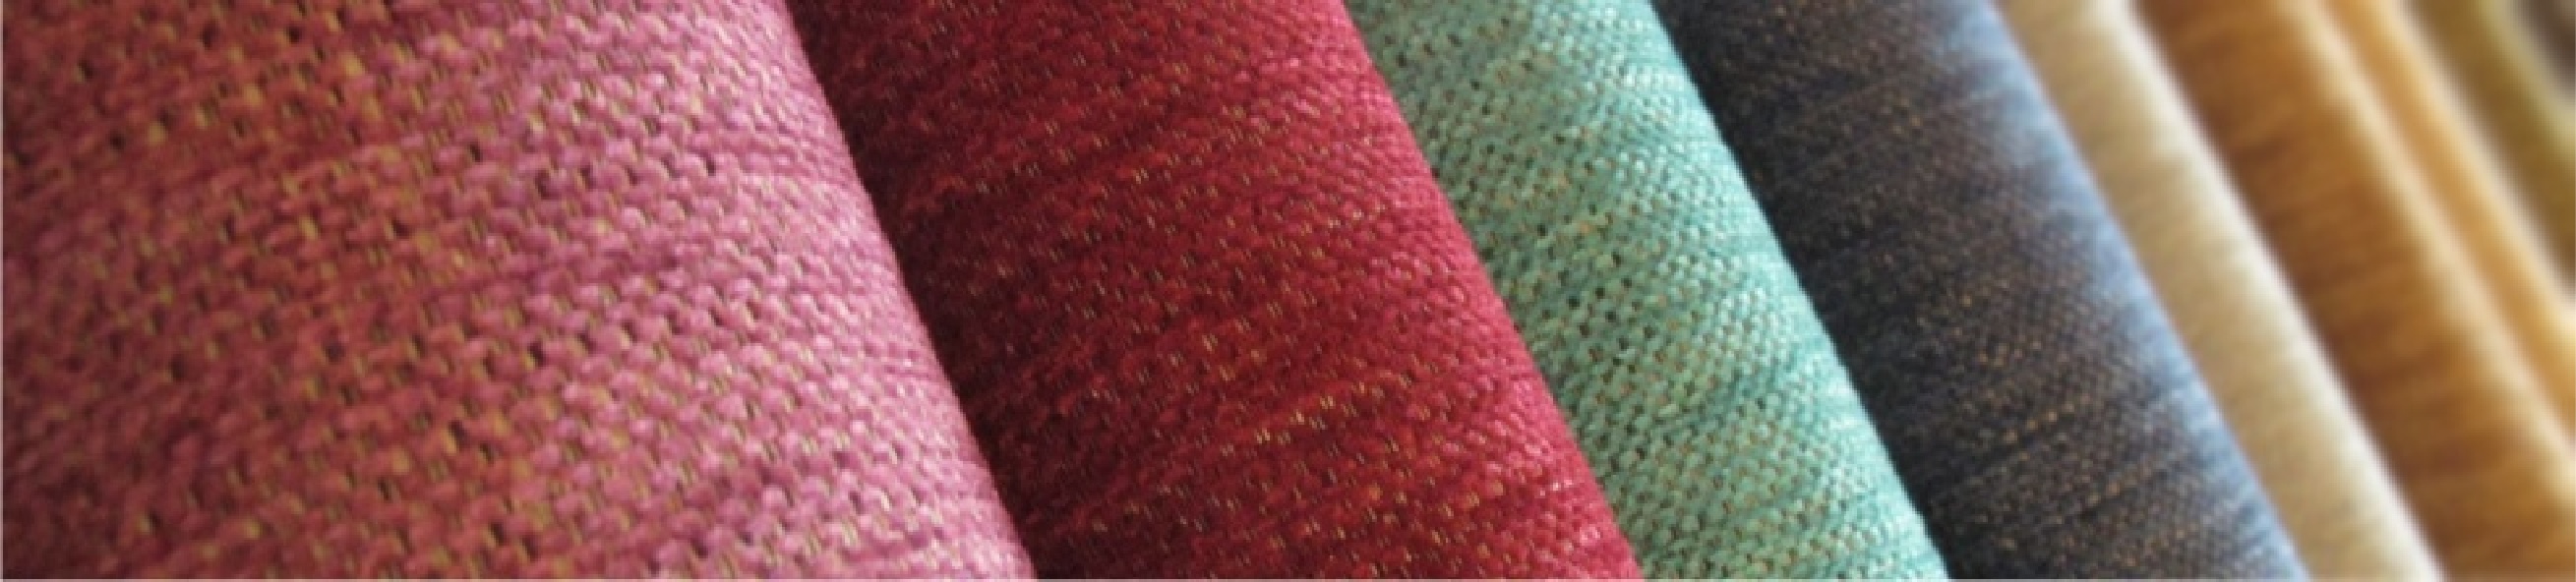 Stamford Lead Performance Chenille  Chenille Fabric - Soft Upholstery  Fabric